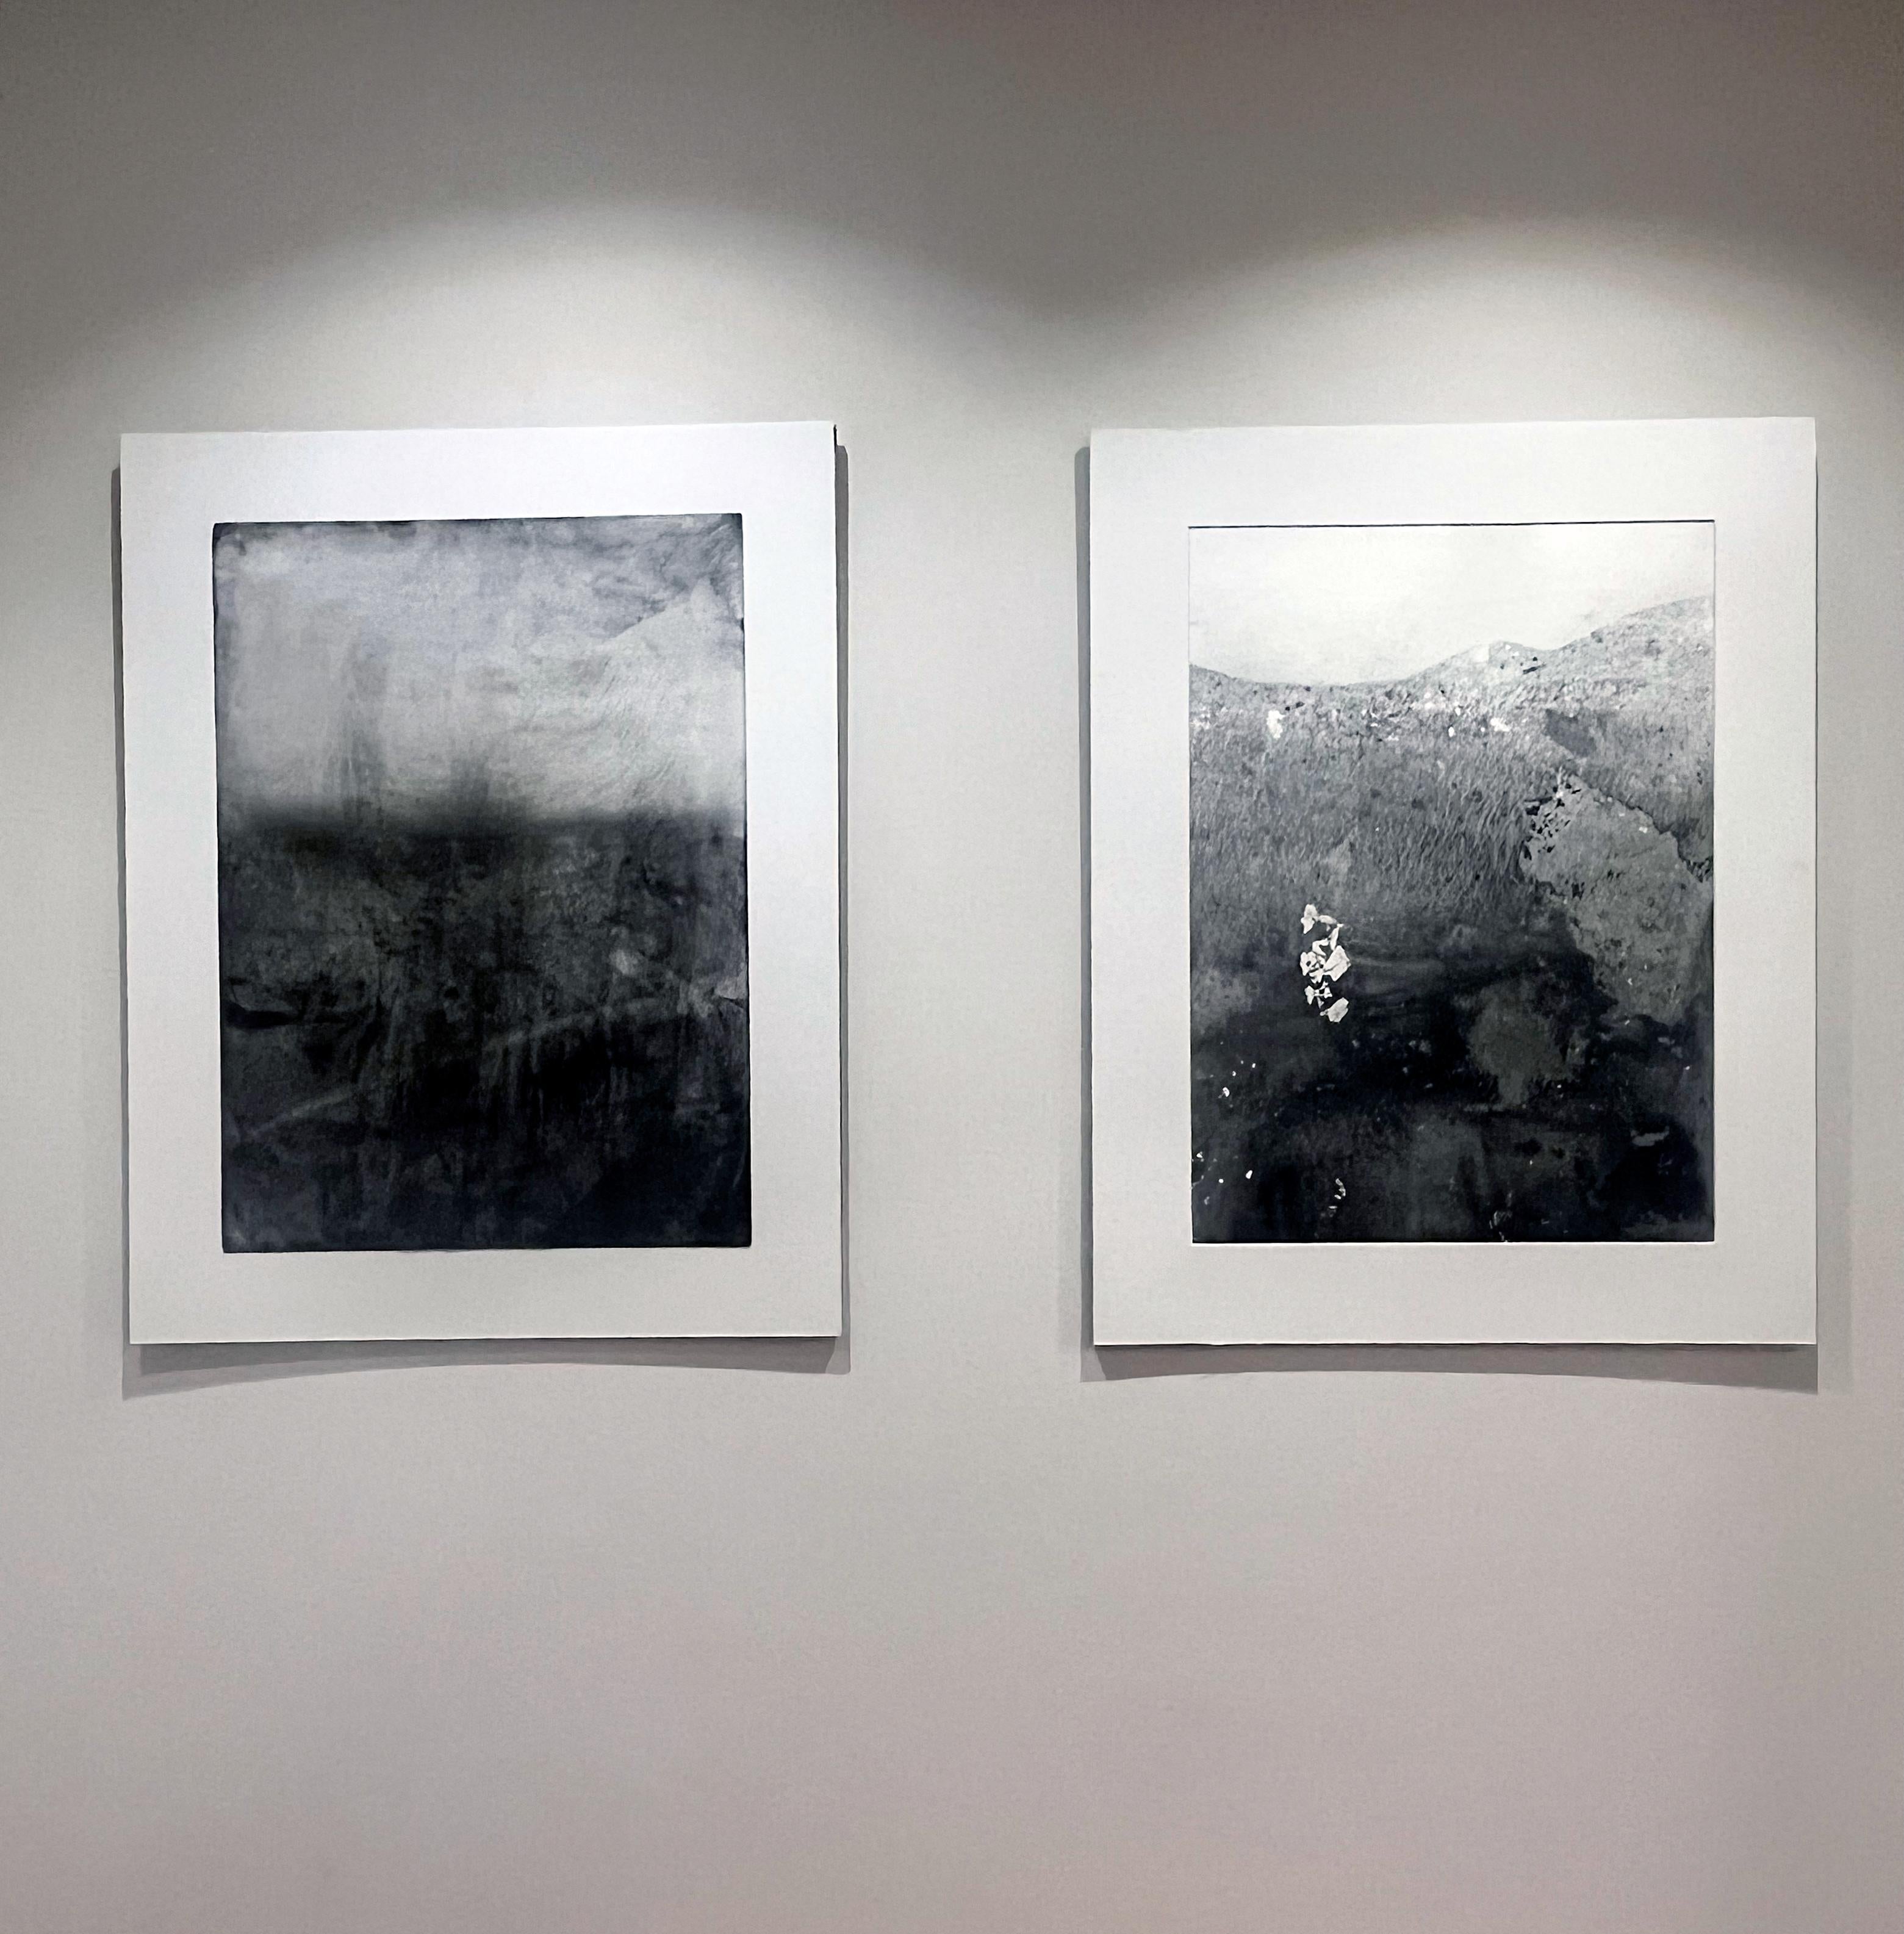 
Landscape B/W
charcoal on paper (Canson paper 300 gr)
30x 42 cm
framed SIZE
40x50 cm
the drawing comes with a passepartout and a rigid support ready to be hung

this painting is published in the personal exhibition catalogue
